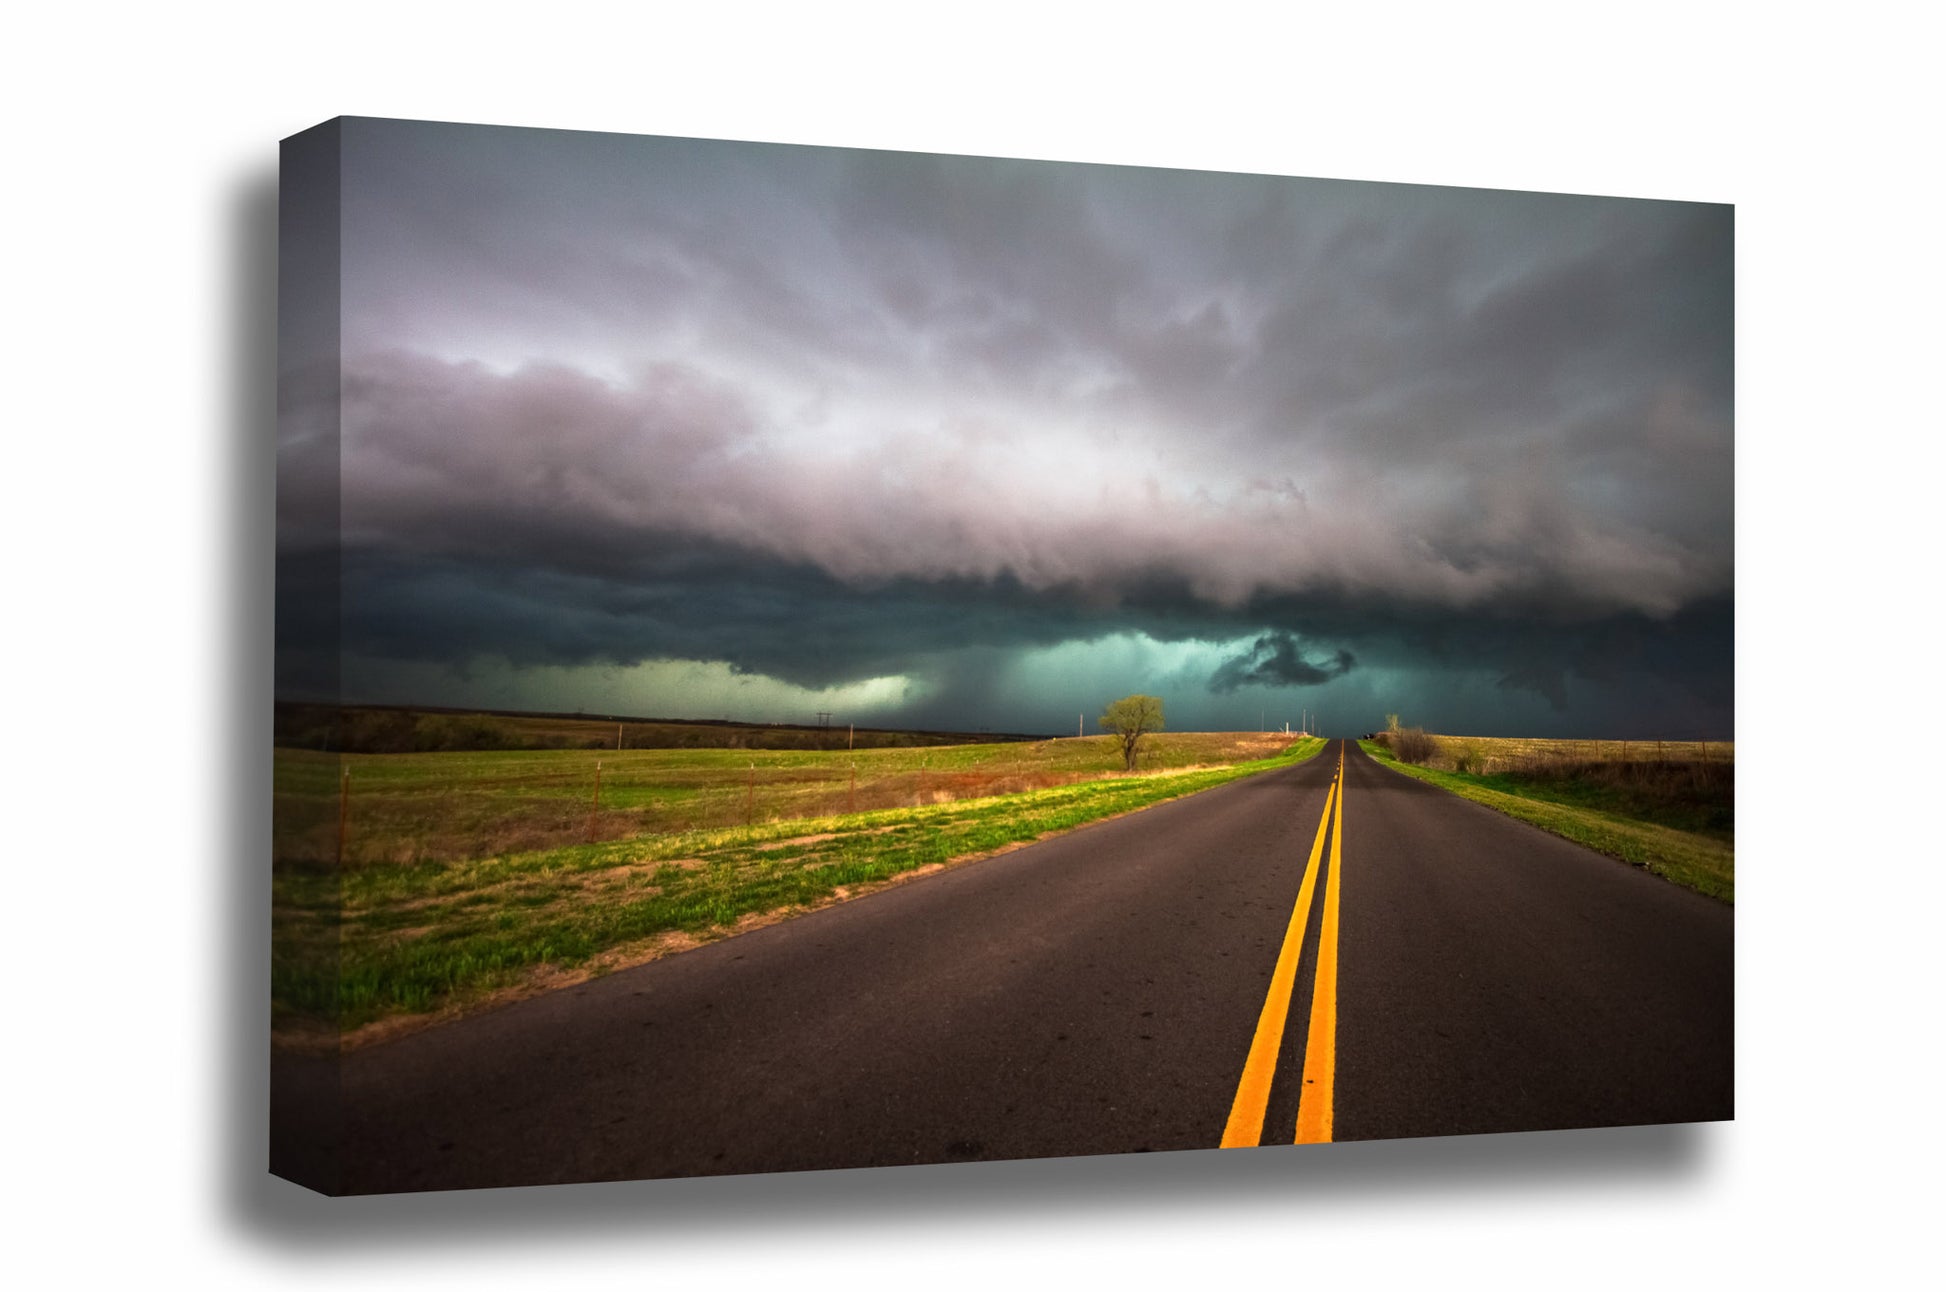 Storm canvas wall art of a highway leading to an intense thunderstorm on a stormy spring evening in Oklahoma by Sean Ramsey of Southern Plains Photography.